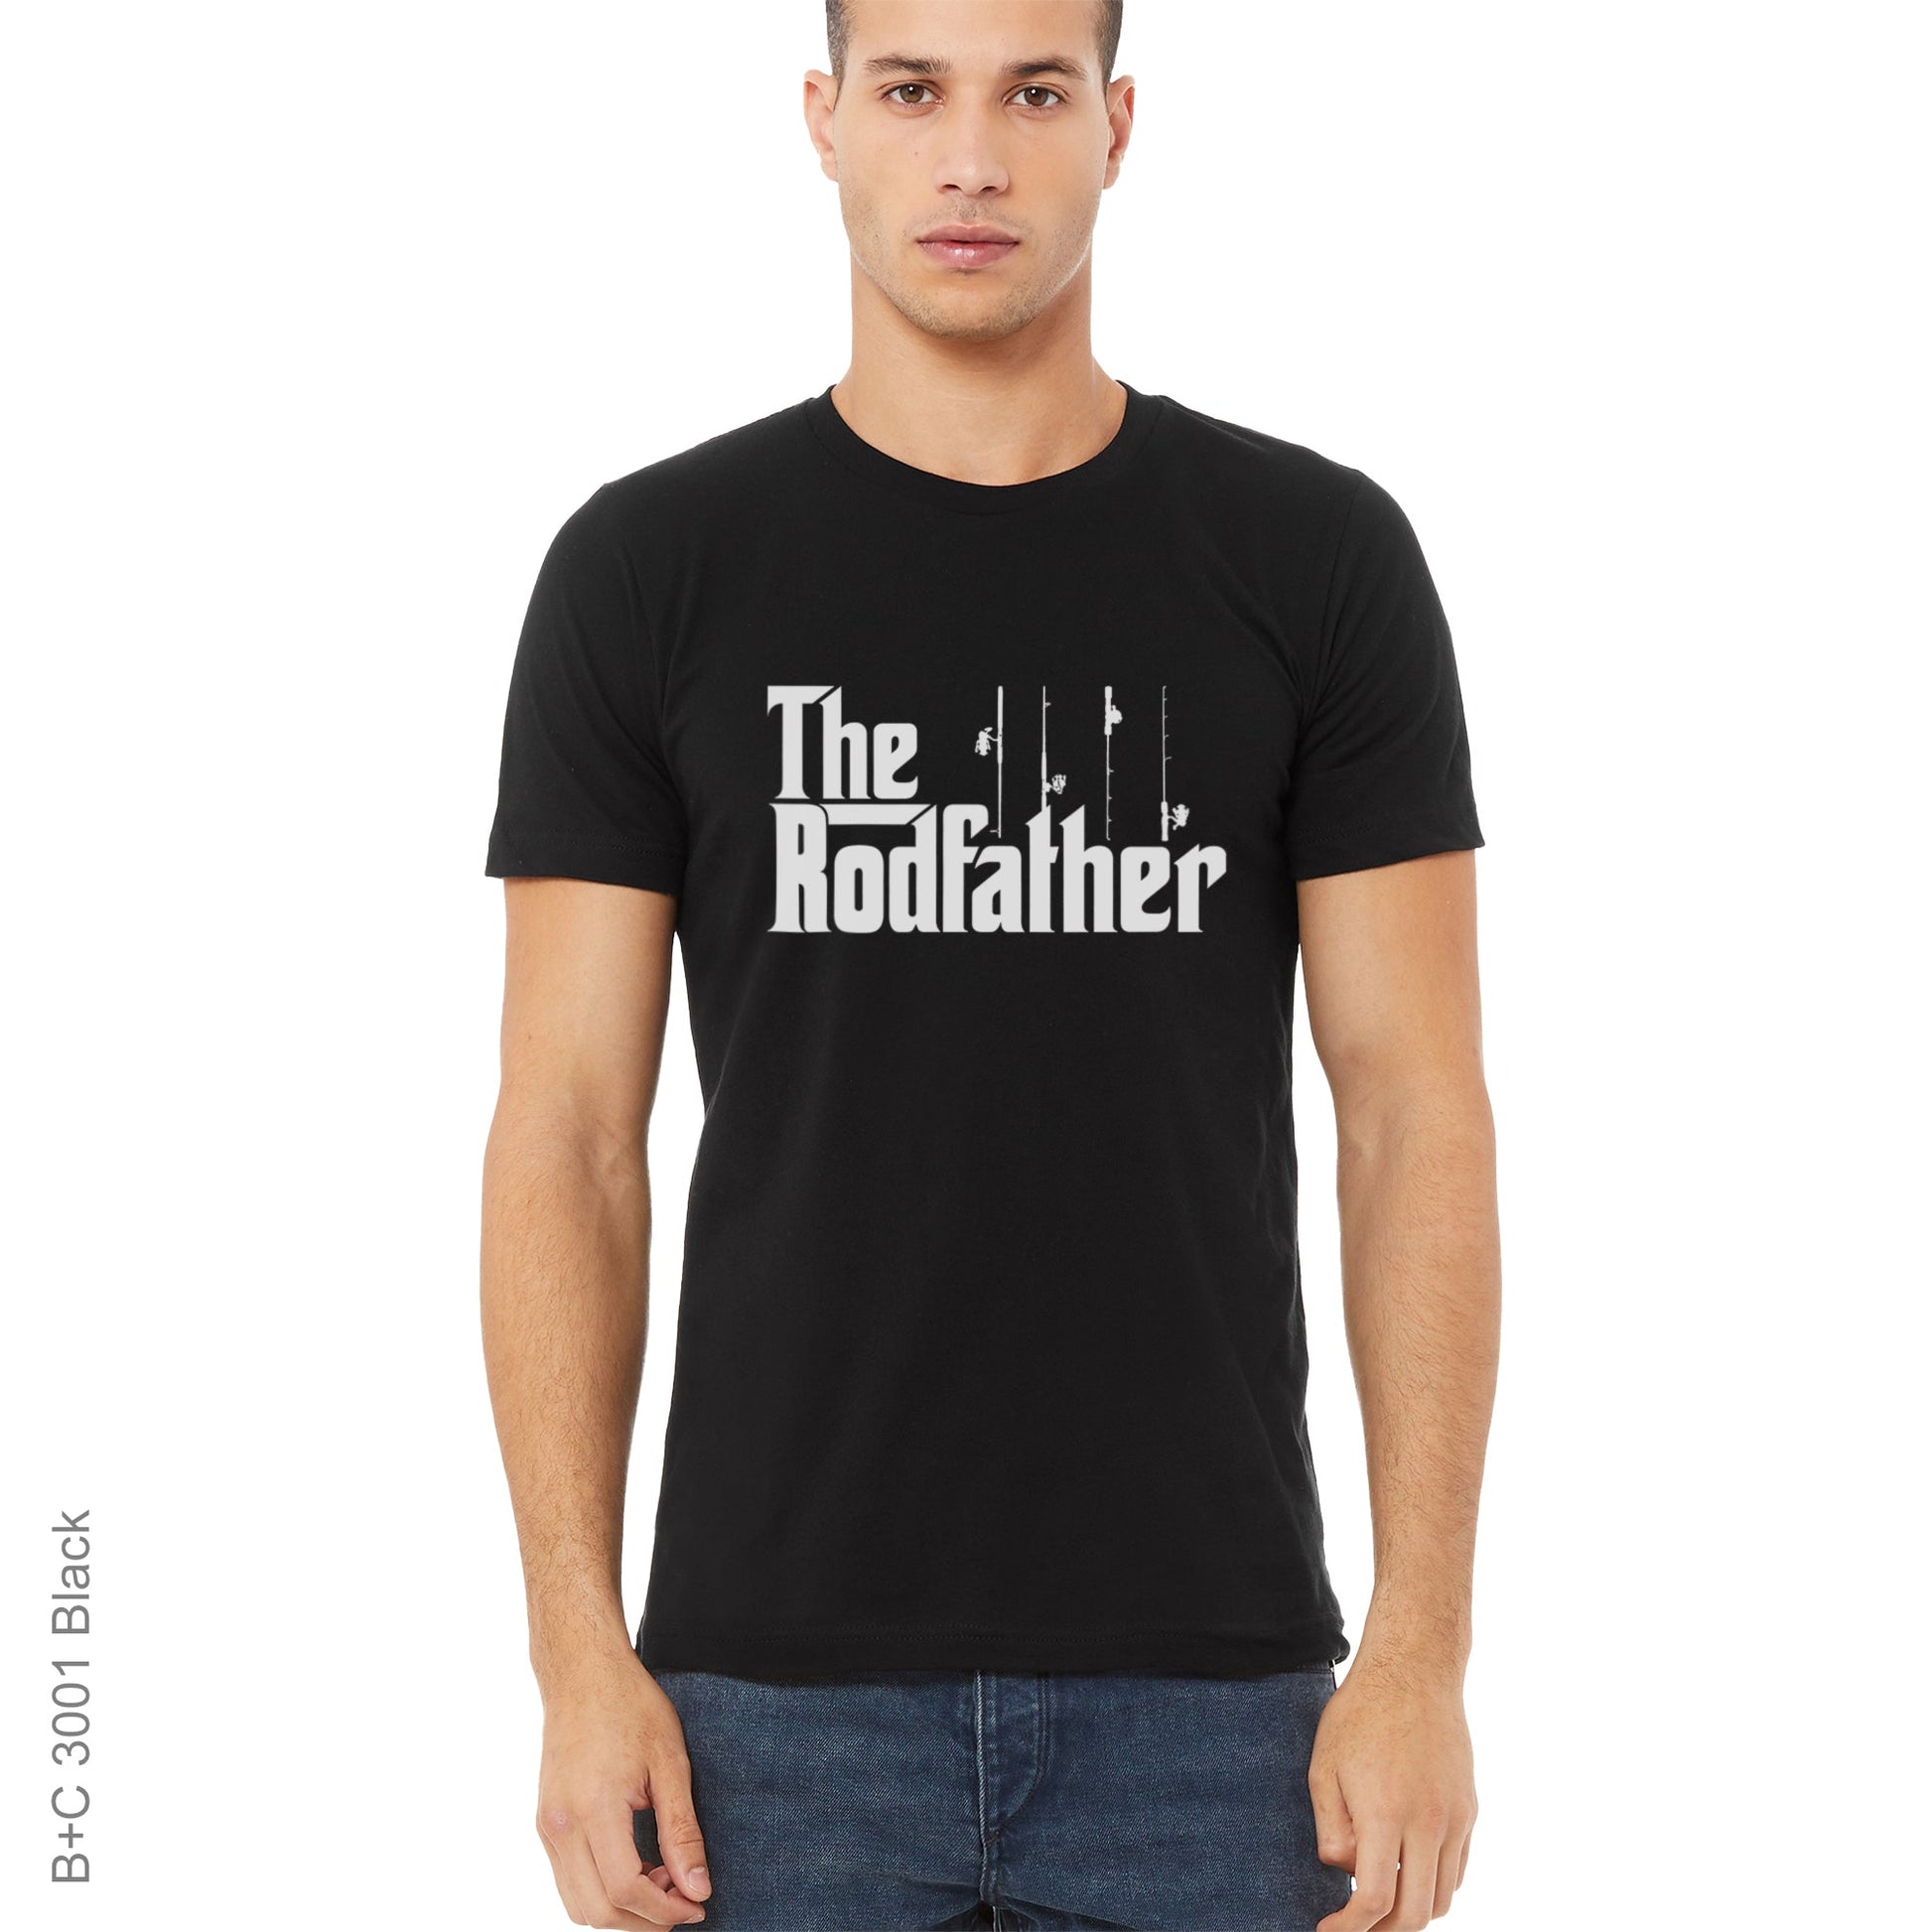 Boss, Funny, Humor, Top dogBuy The Rodfather Tee Online